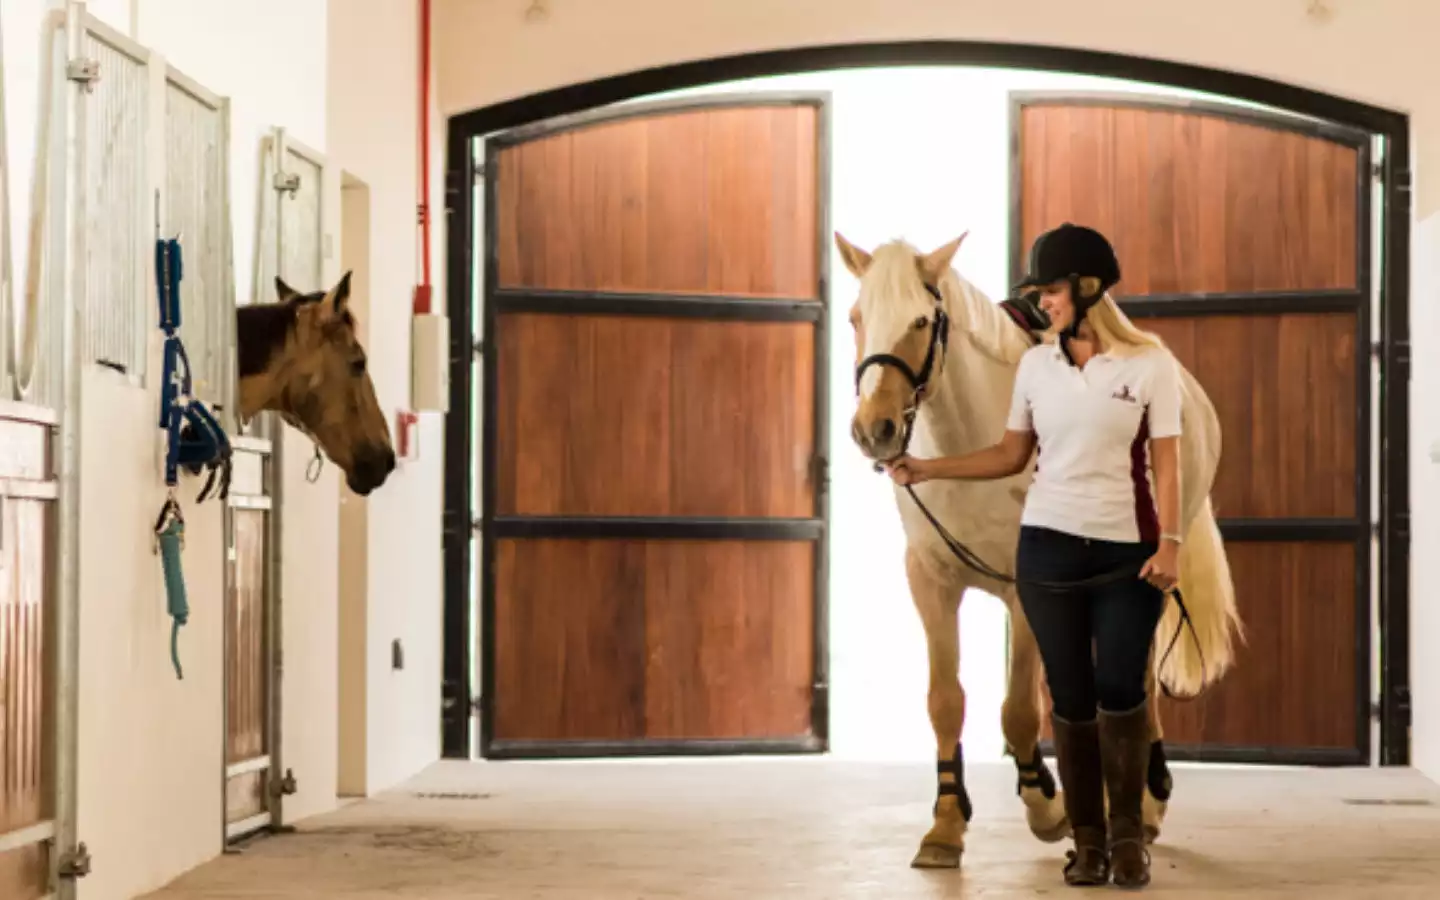 equestrian-centers-and-stables-ask-aladdin